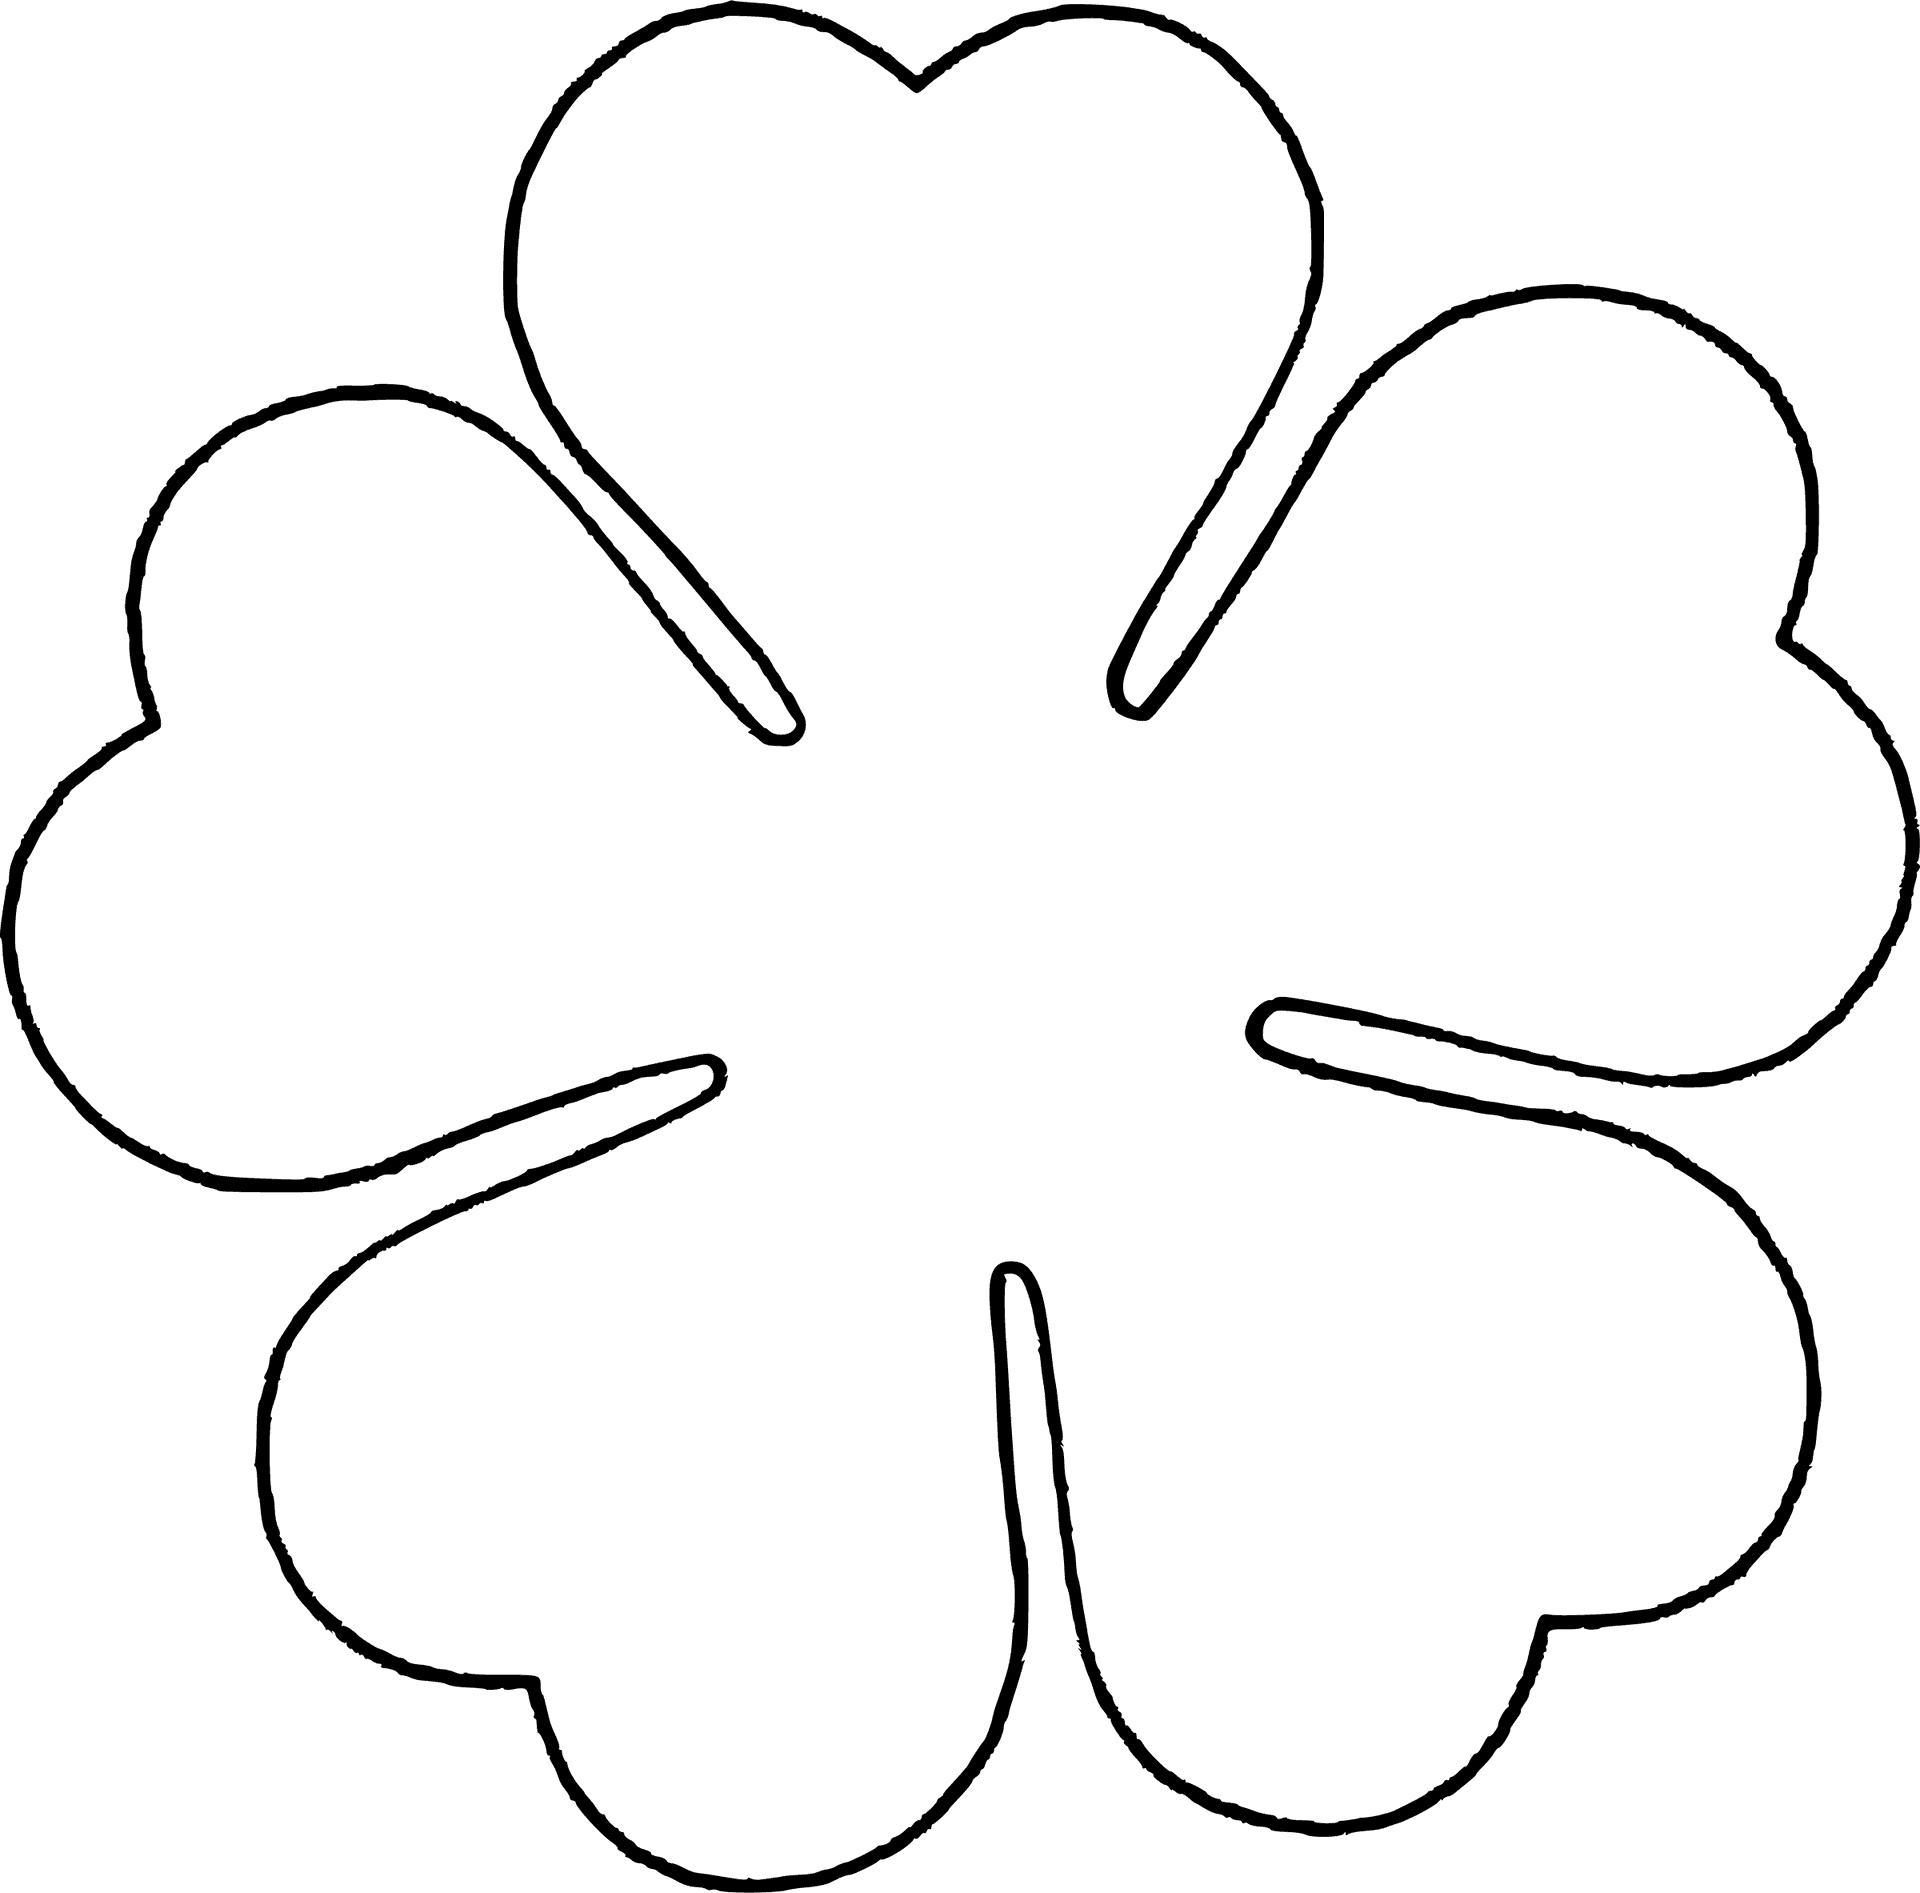 Abstract Heart Shaped Petal Design PNG